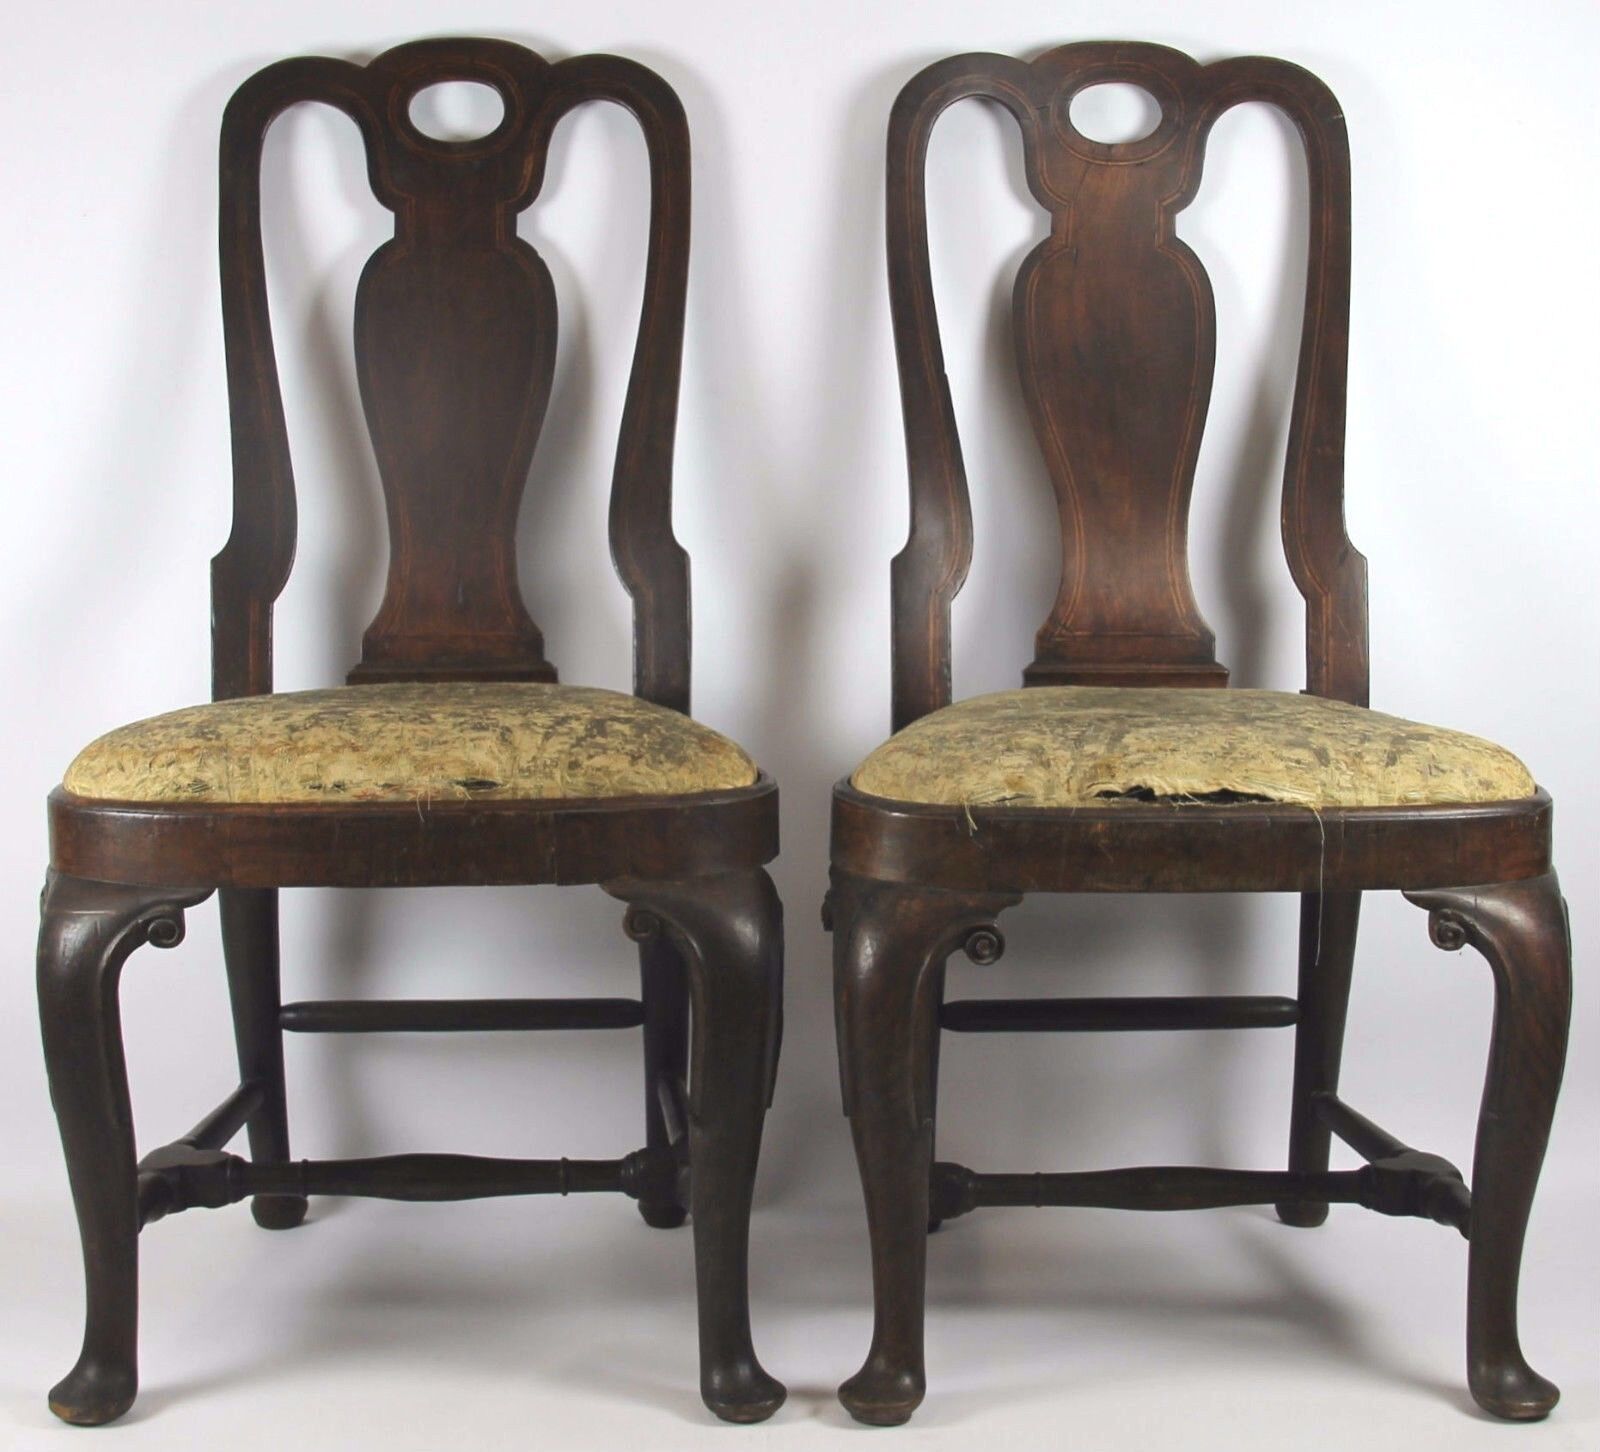 PAIR OF CHAIRS QUEEN ANNE-STYLE. WALNUT WOOD. BOXWOOD MARQUETRY. 18TH CENTURY